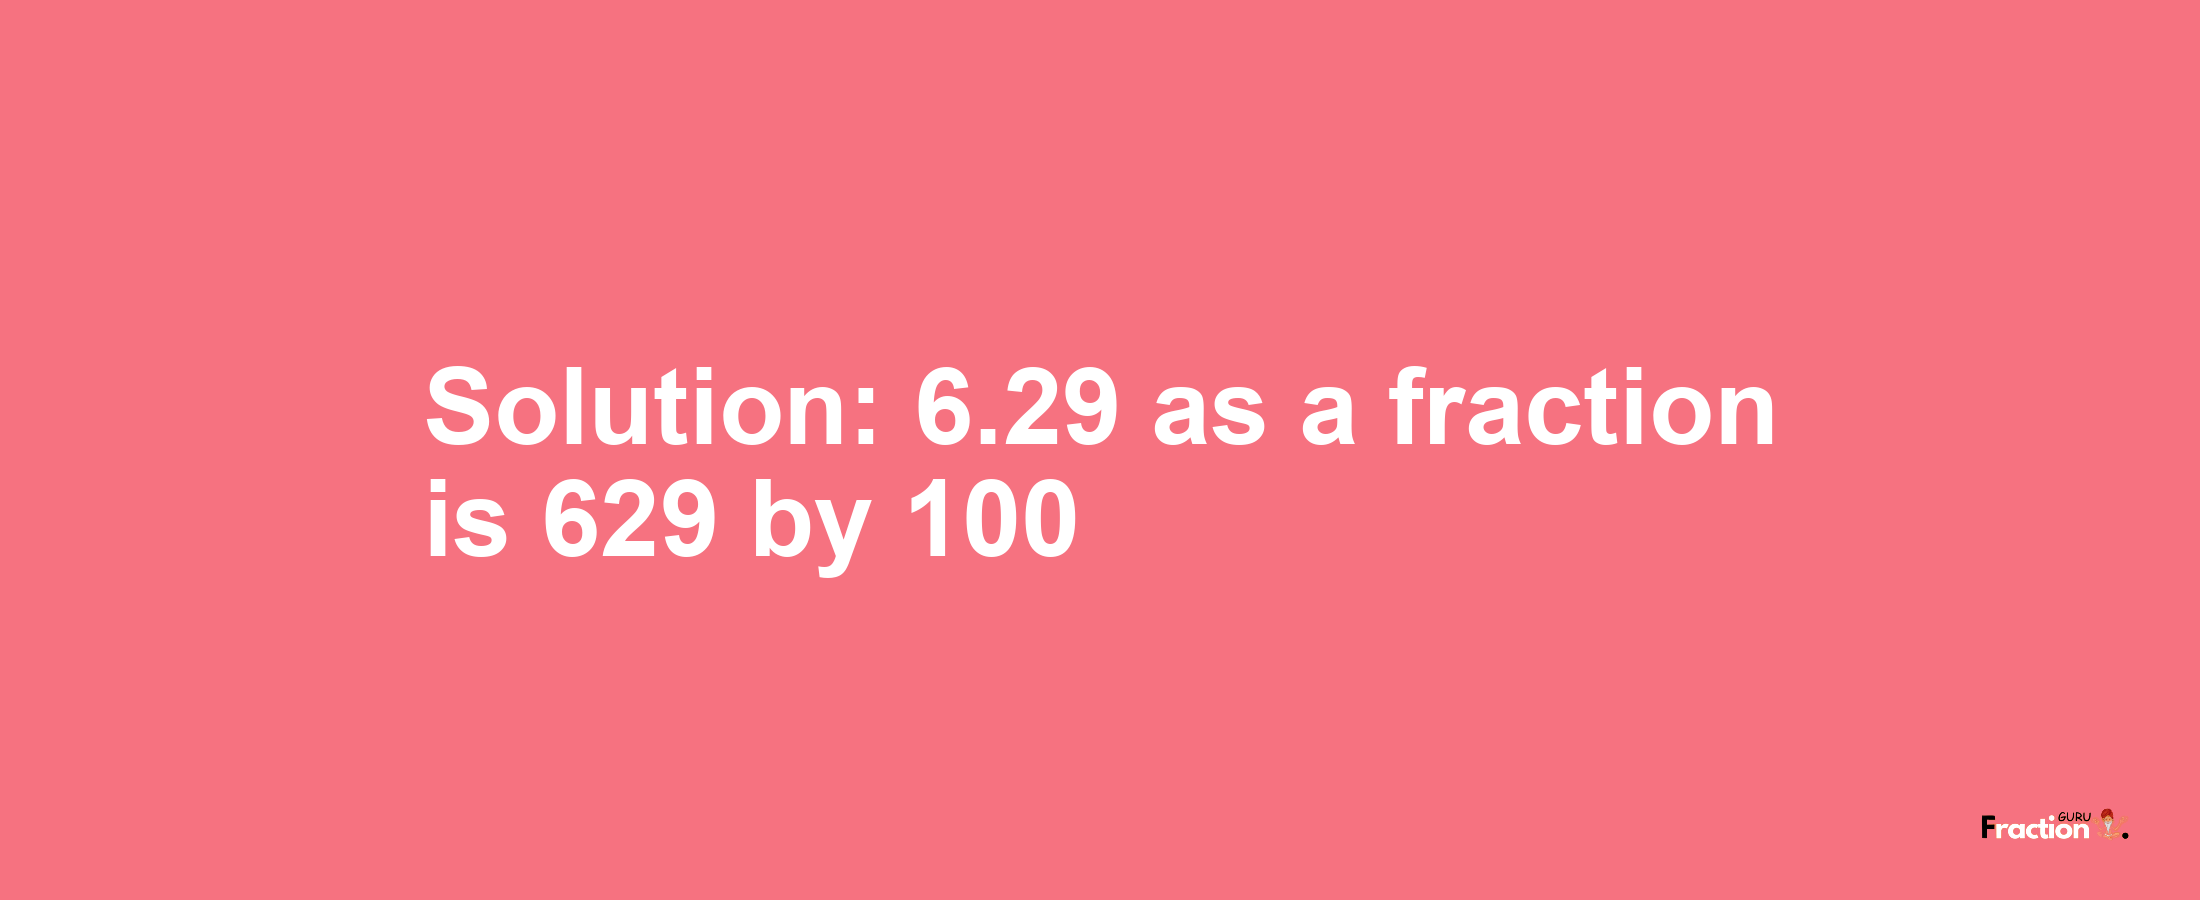 Solution:6.29 as a fraction is 629/100